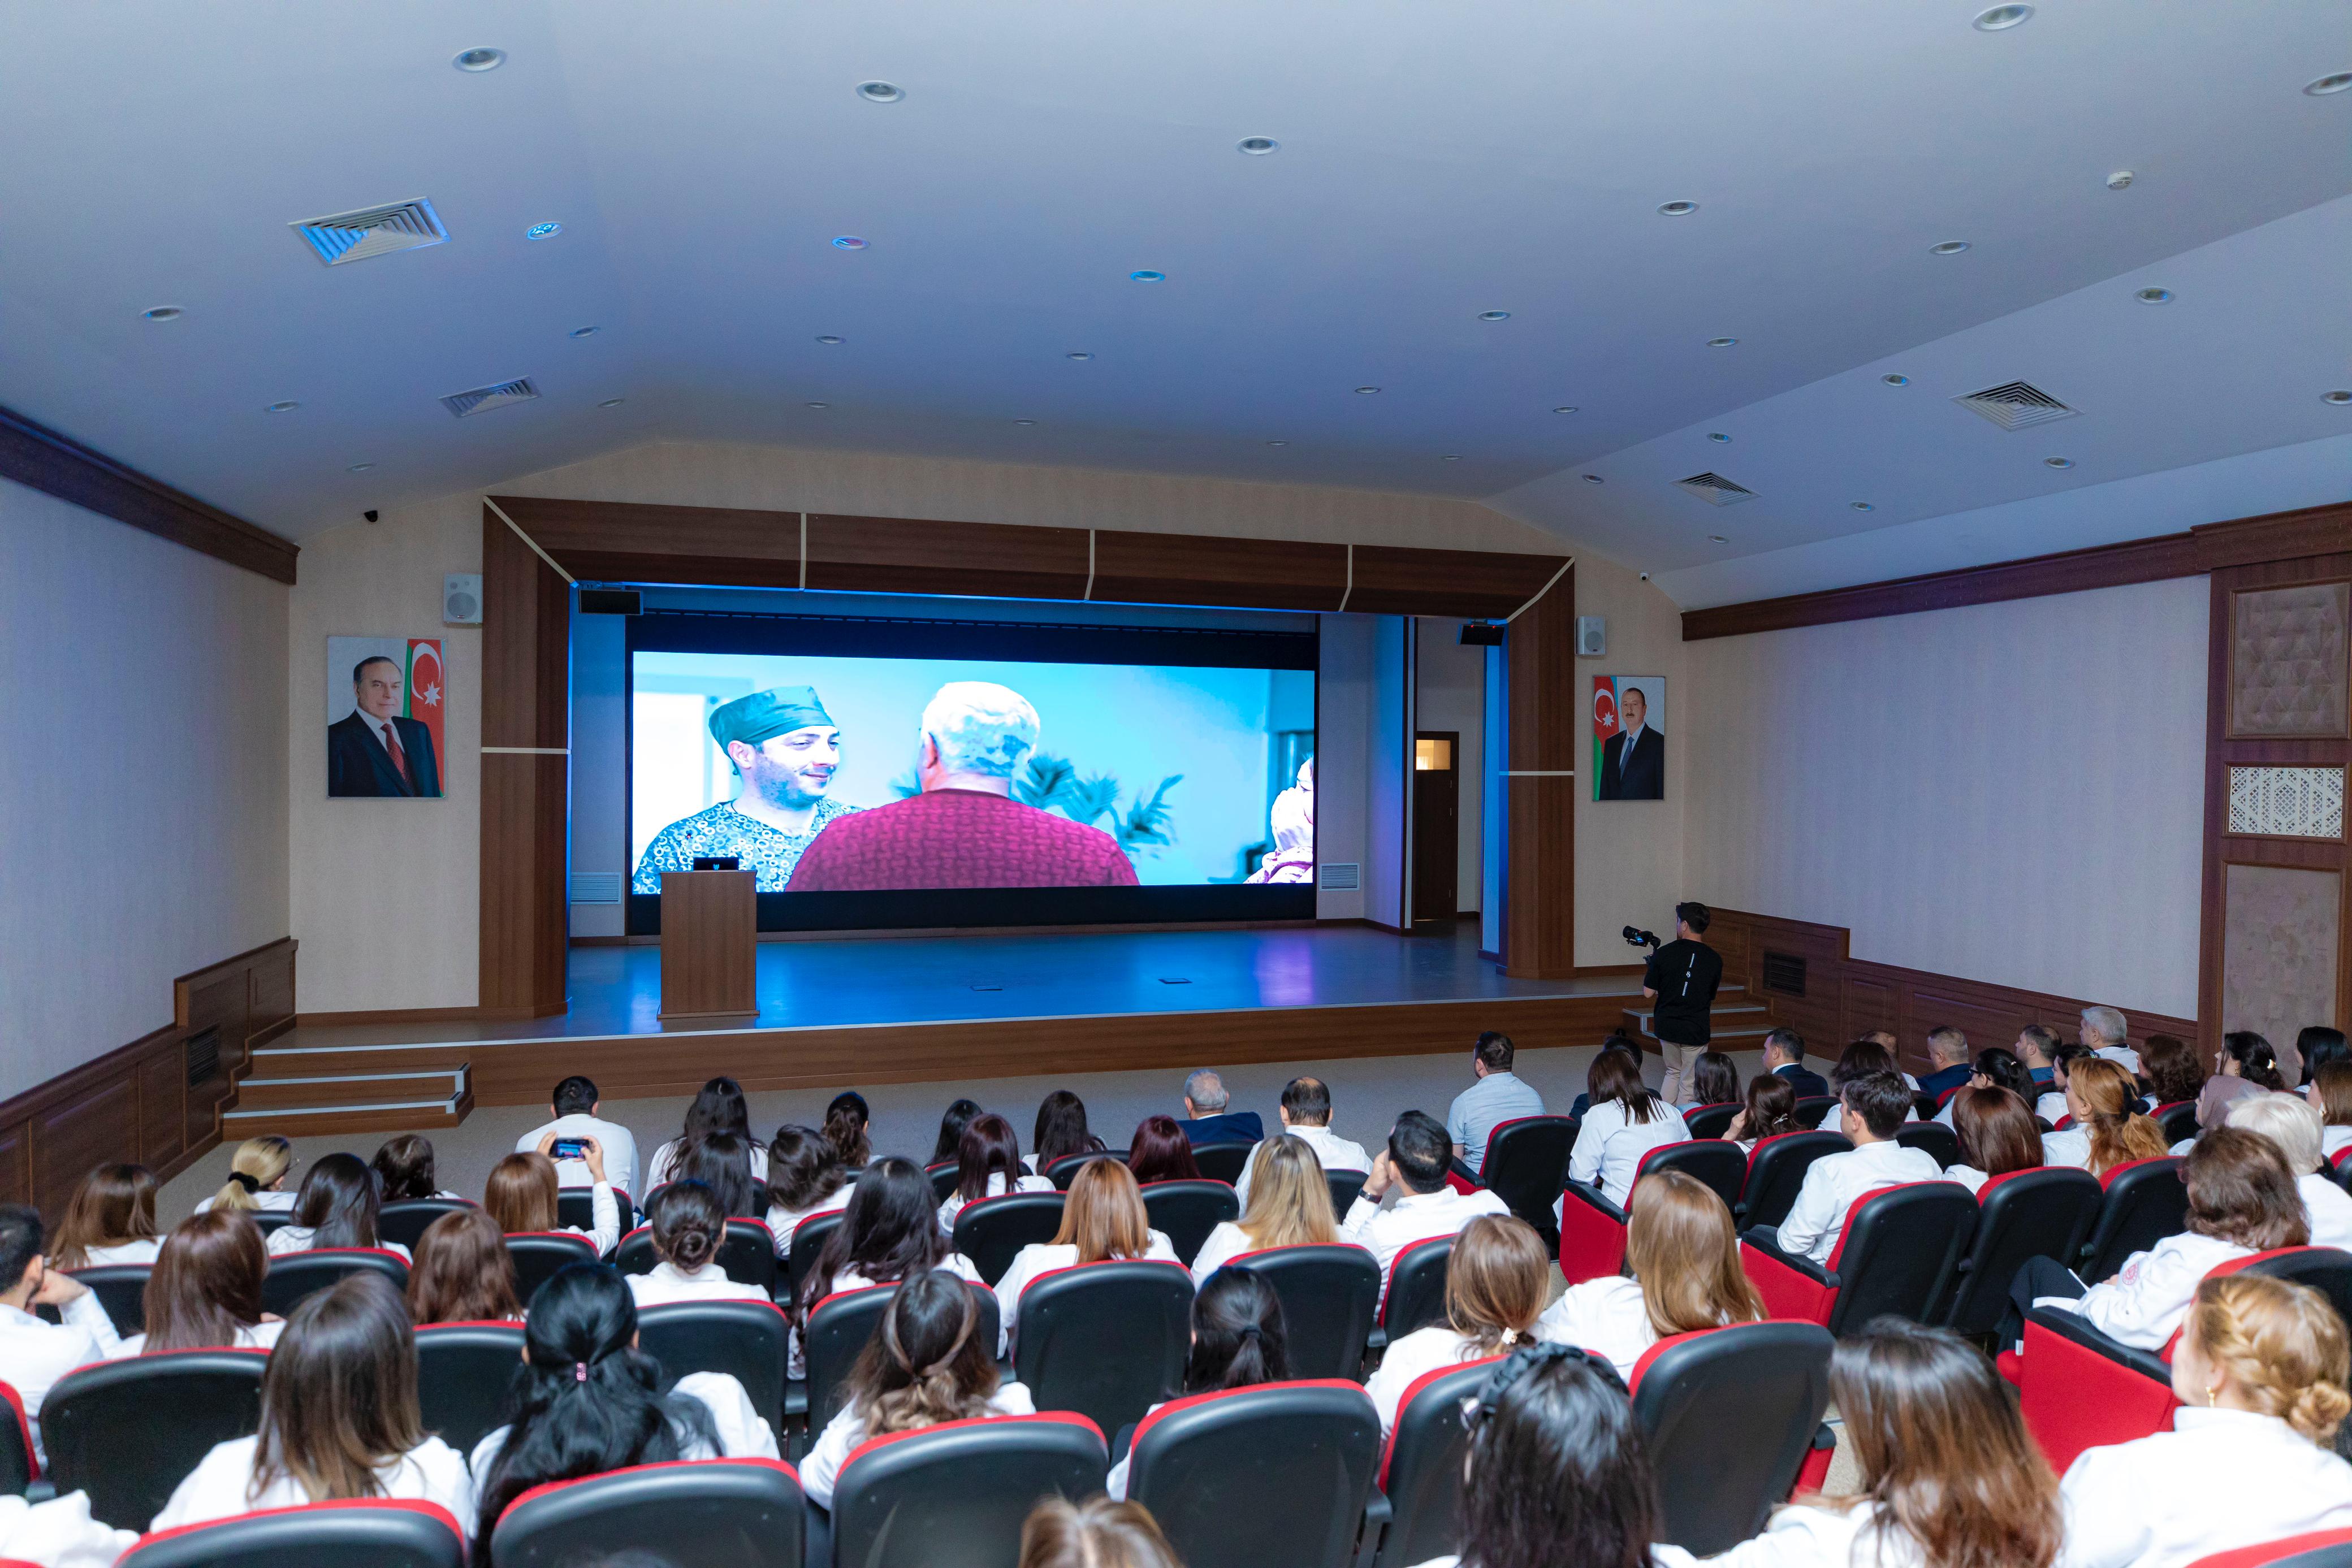 a group of people sitting in a room with a large screen